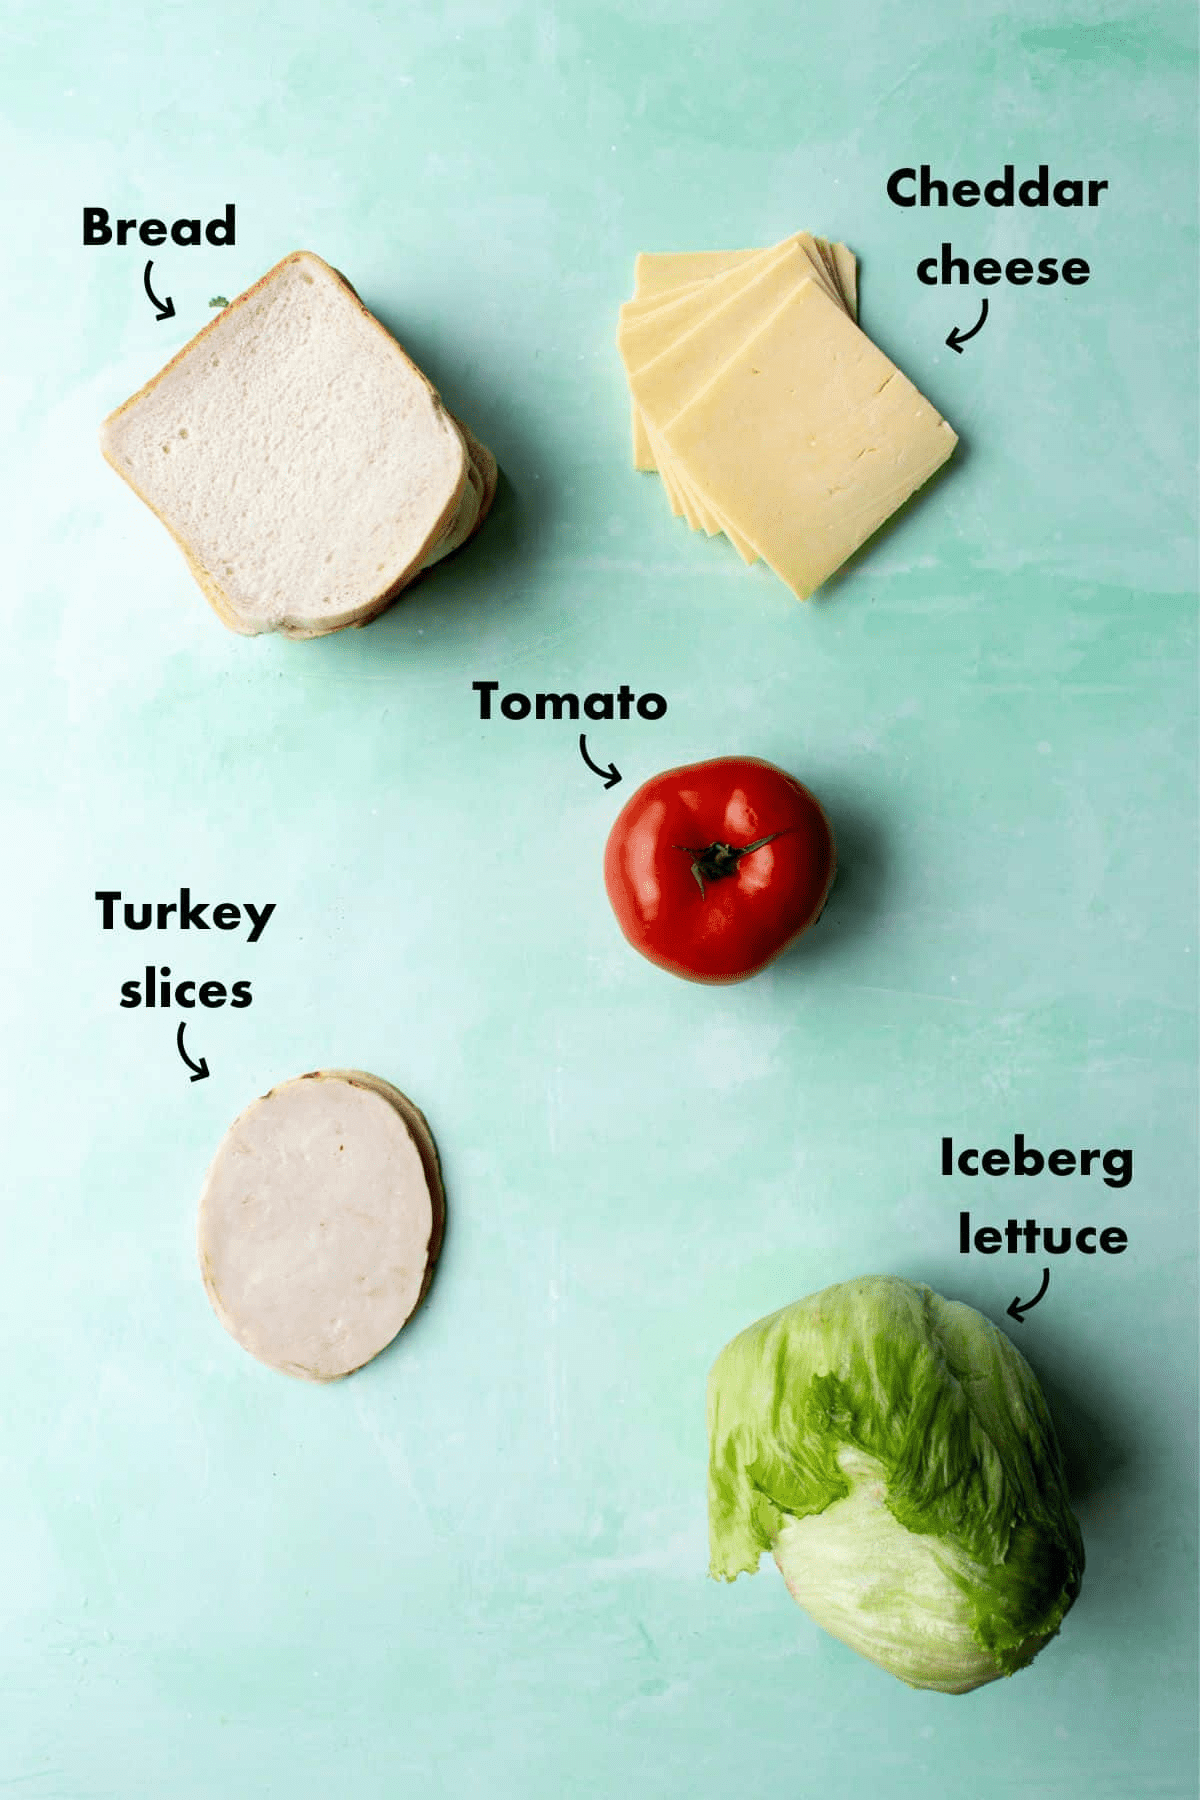 Ingredients to make turkey sandwich, sliced white bread, turkey slices, lettuce, tomato and cheddar cheese slices.